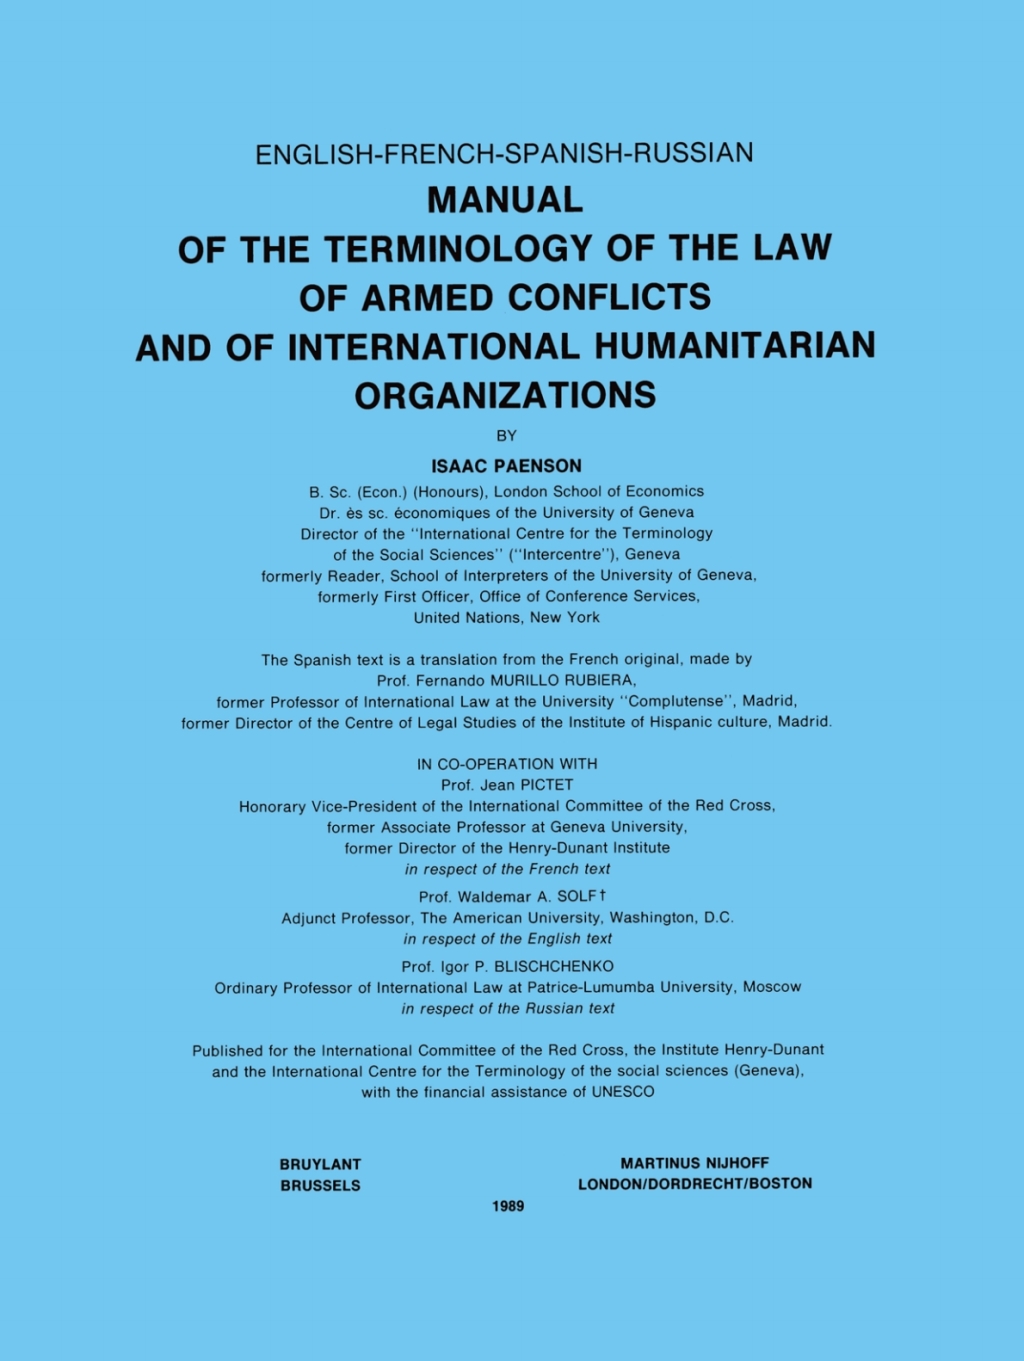 Manual of the Terminology of the Law of Armed Conflicts and of International Humanitarian Organizations (eBook Rental) - Isaac Paenson,